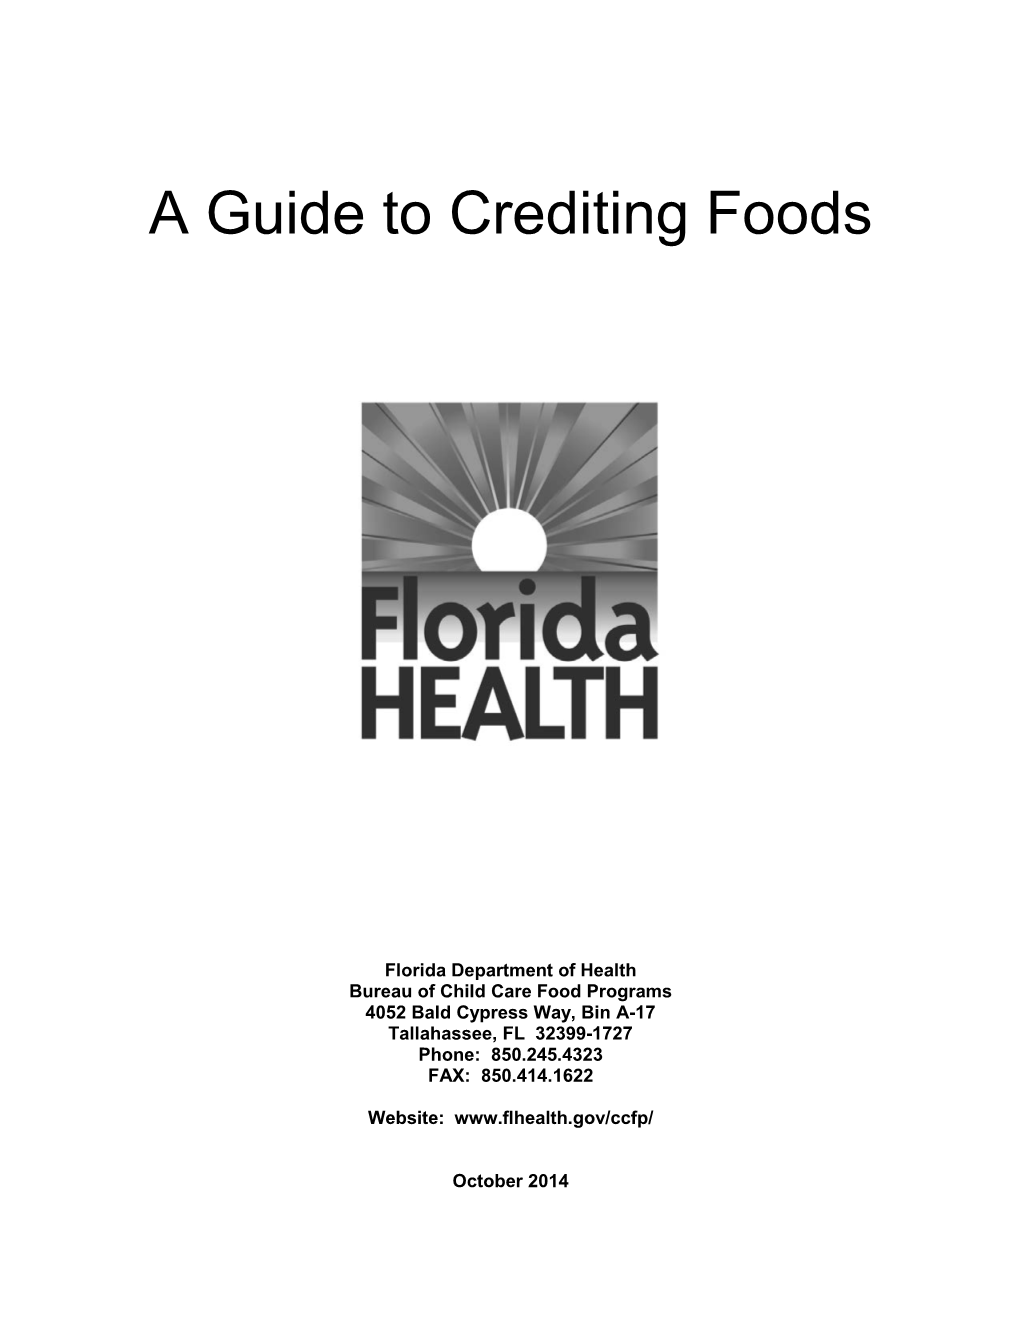 A Guide to Crediting Foods